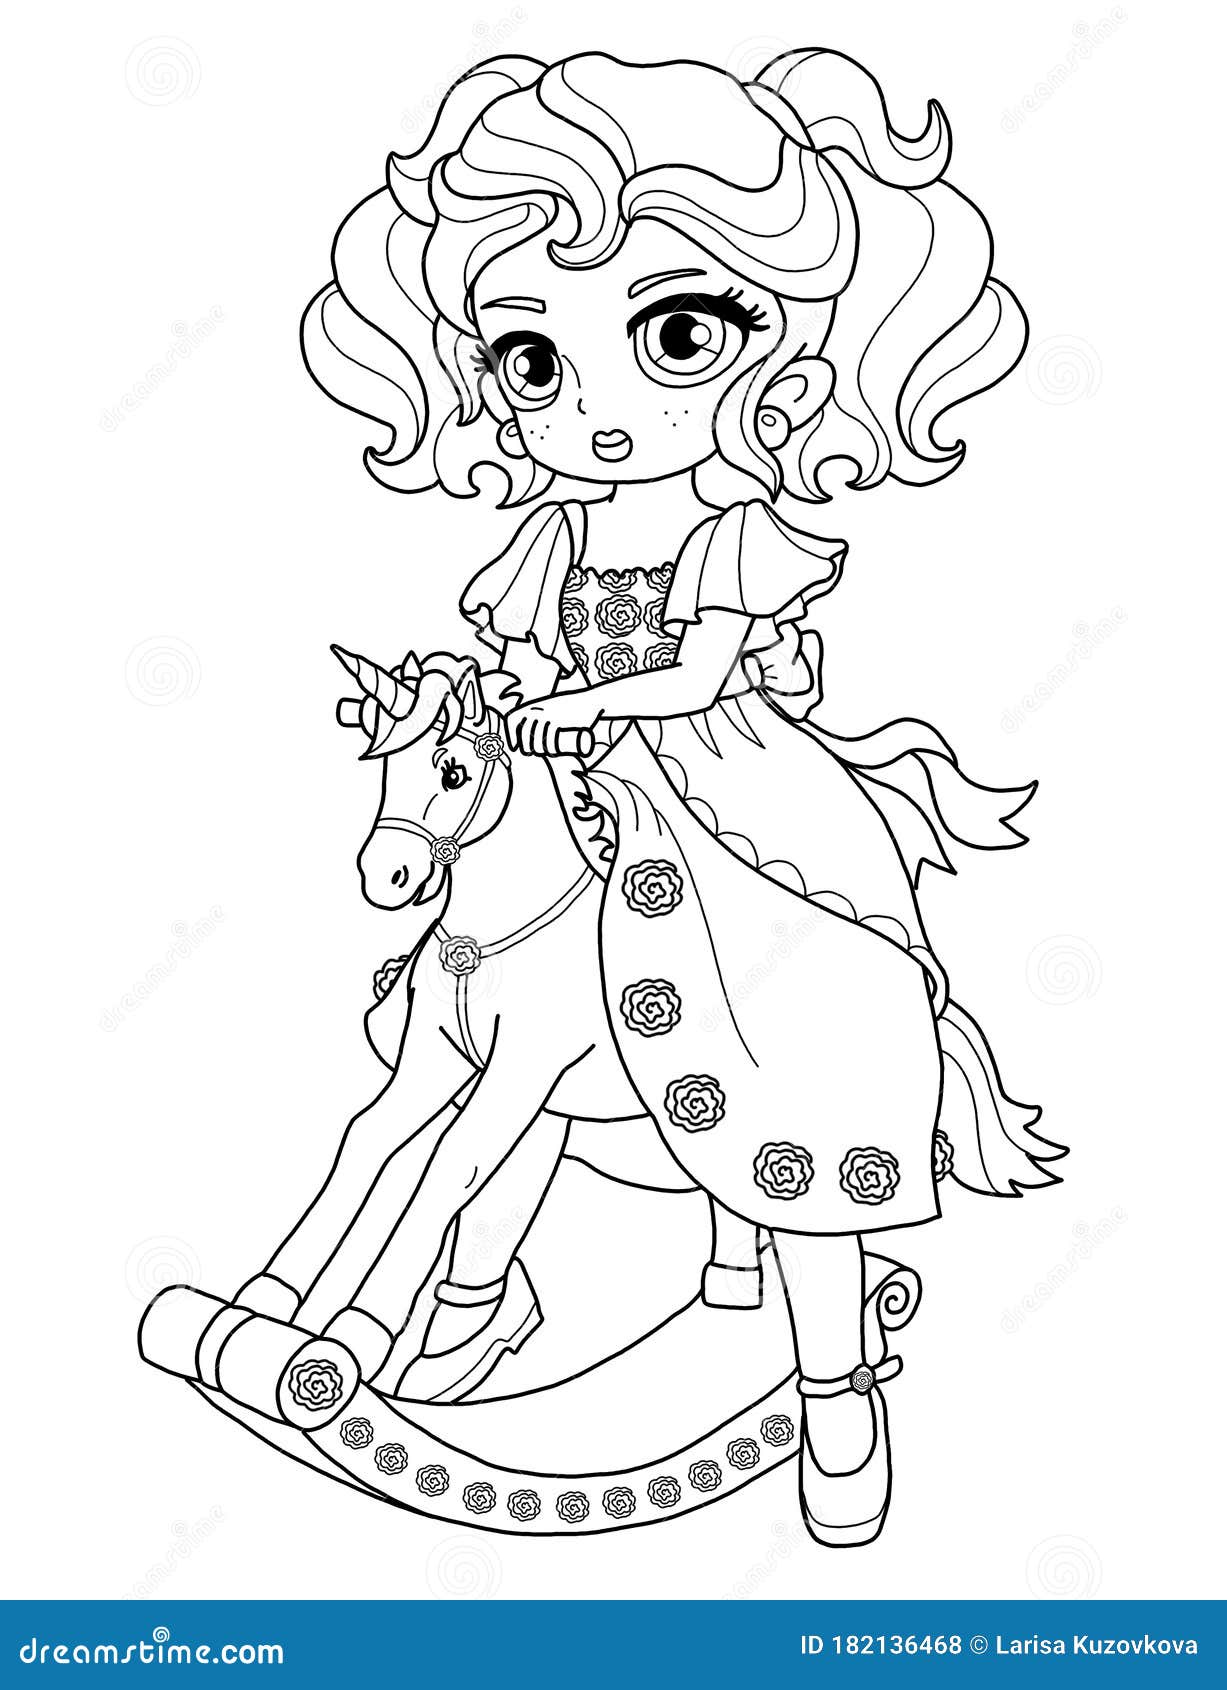 Coloring Sheets Stock Illustrations – 1,434 Coloring Sheets Stock  Illustrations, Vectors & Clipart - Dreamstime